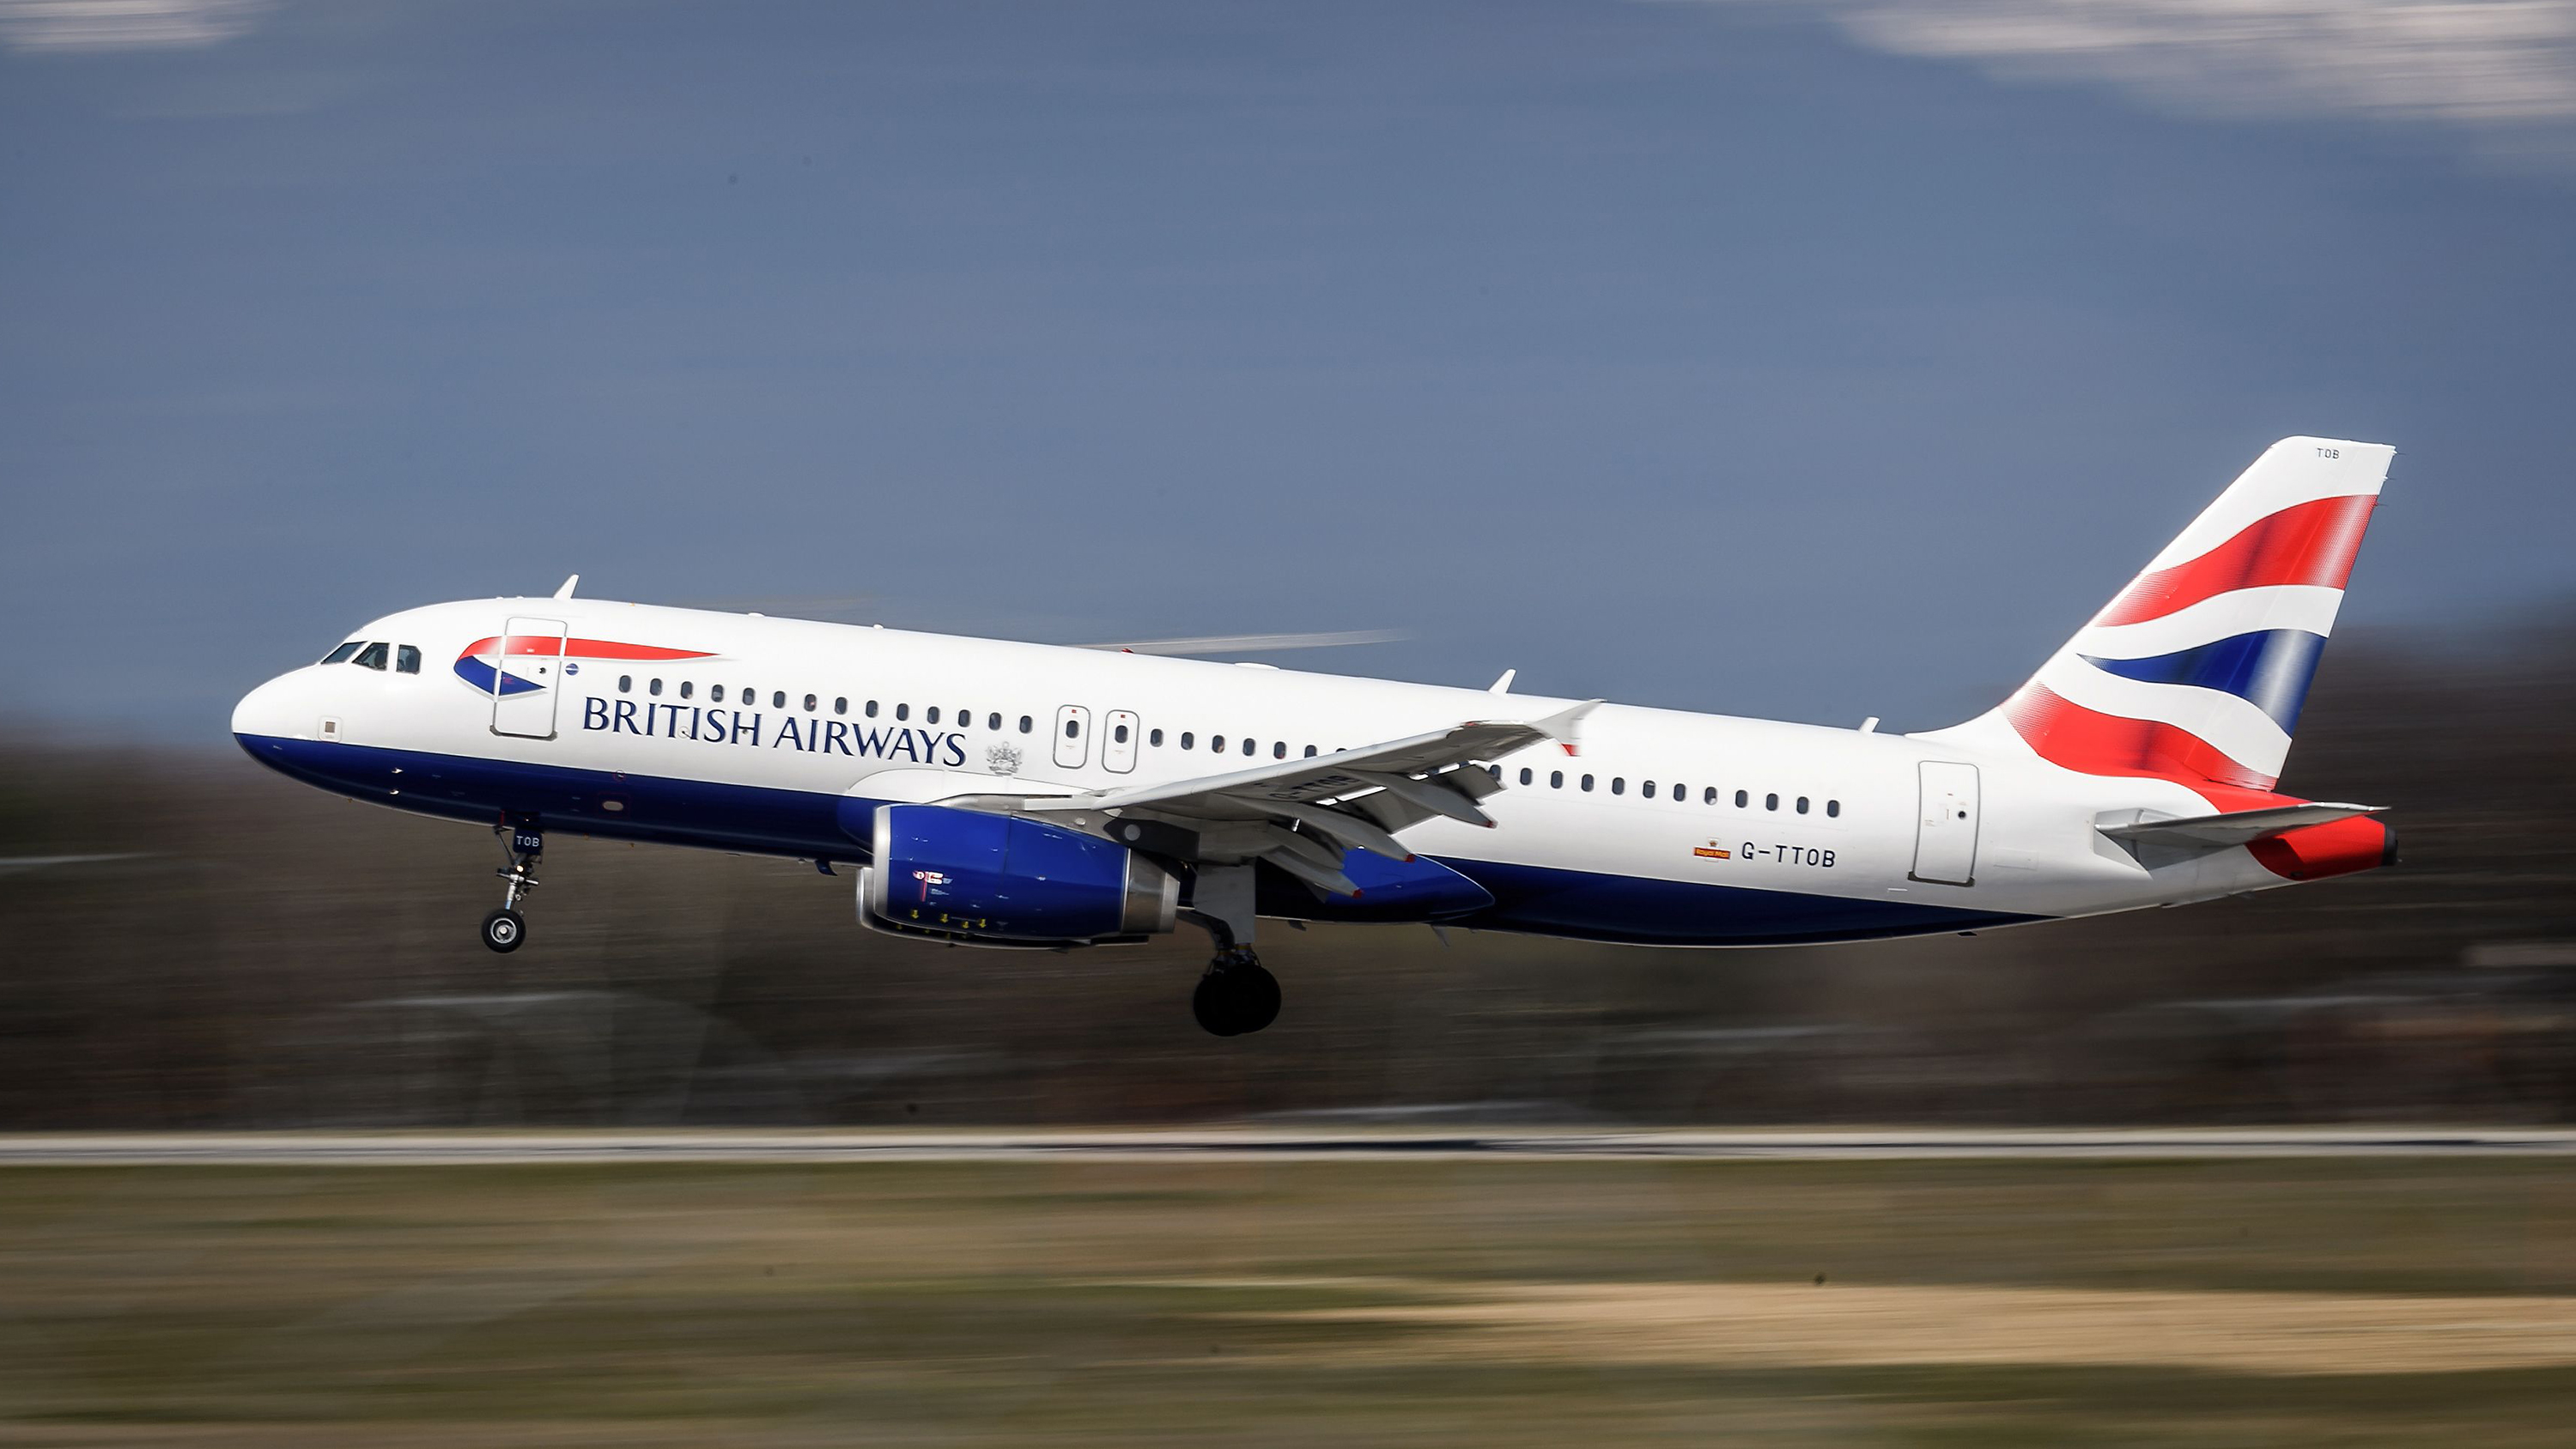 British Airways has joined other airlines in diverting flights from the region.